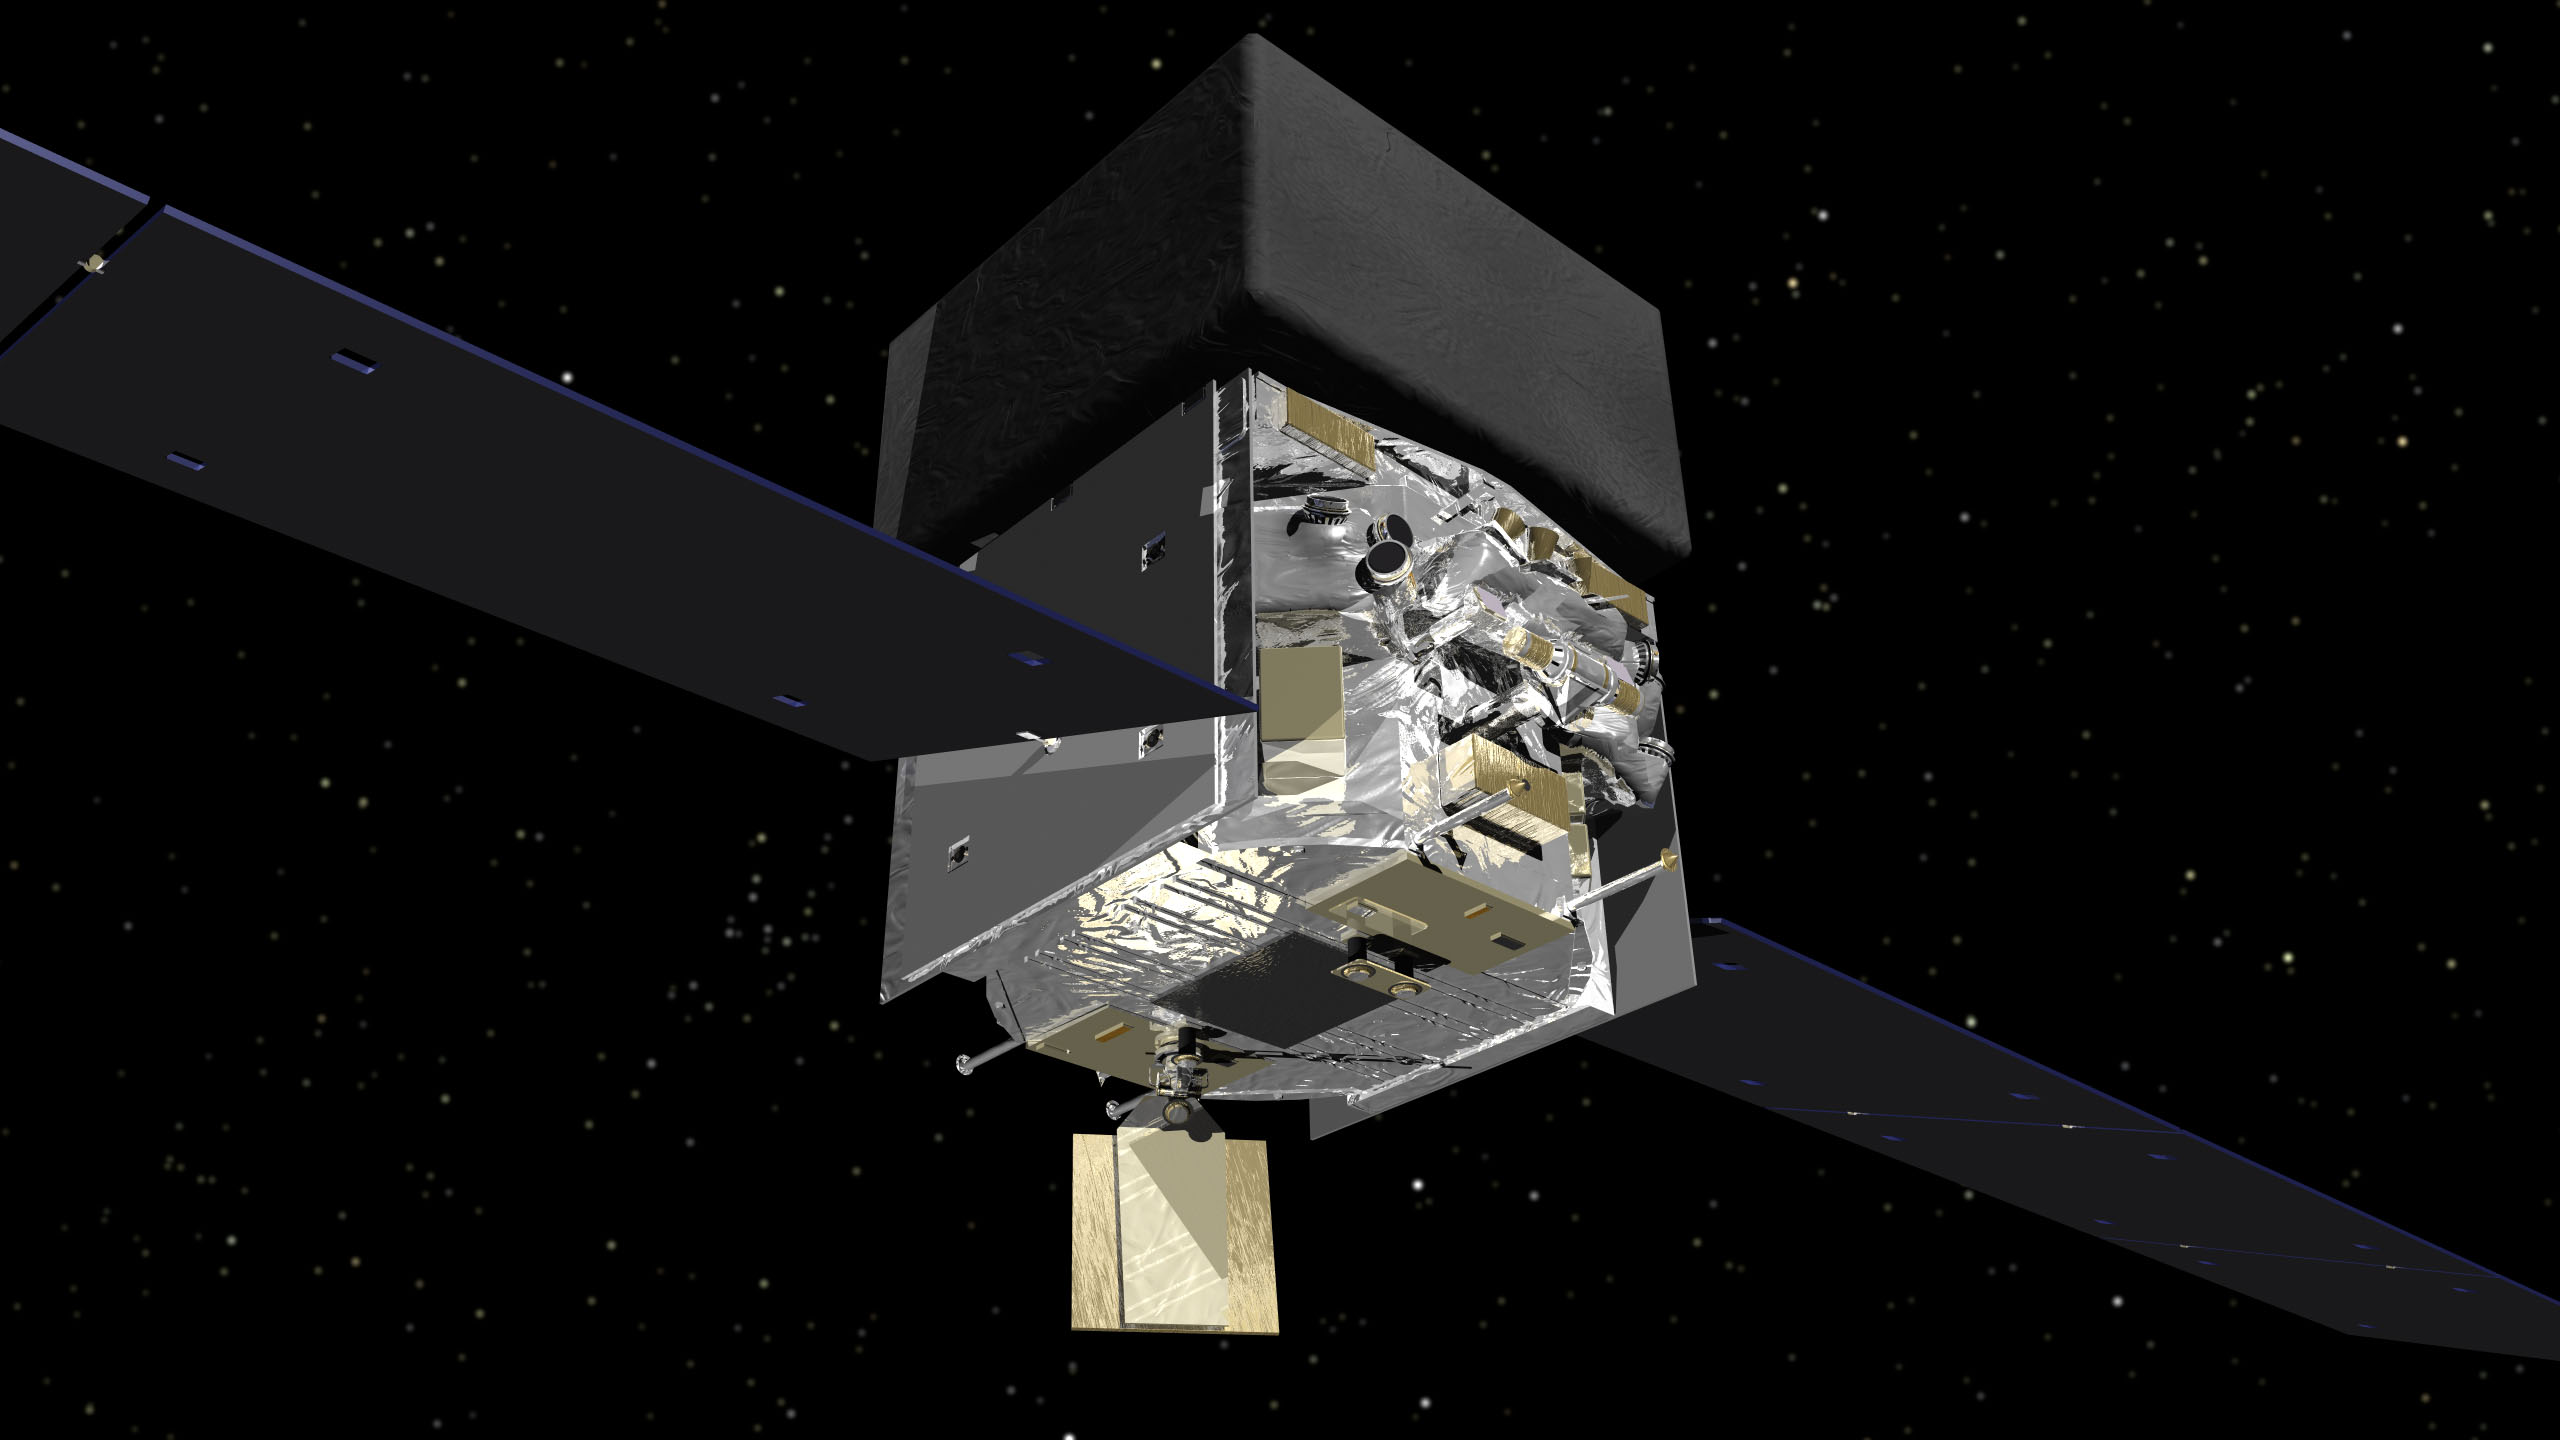 This computer graphic shows the structure of NASA’s Fermi satellite. The central, box-shaped instrumentation platform lies between the solar panels. The Large Area Telescope, data from which the astronomers evaluated, is hidden beneath the black cover visible on the top.